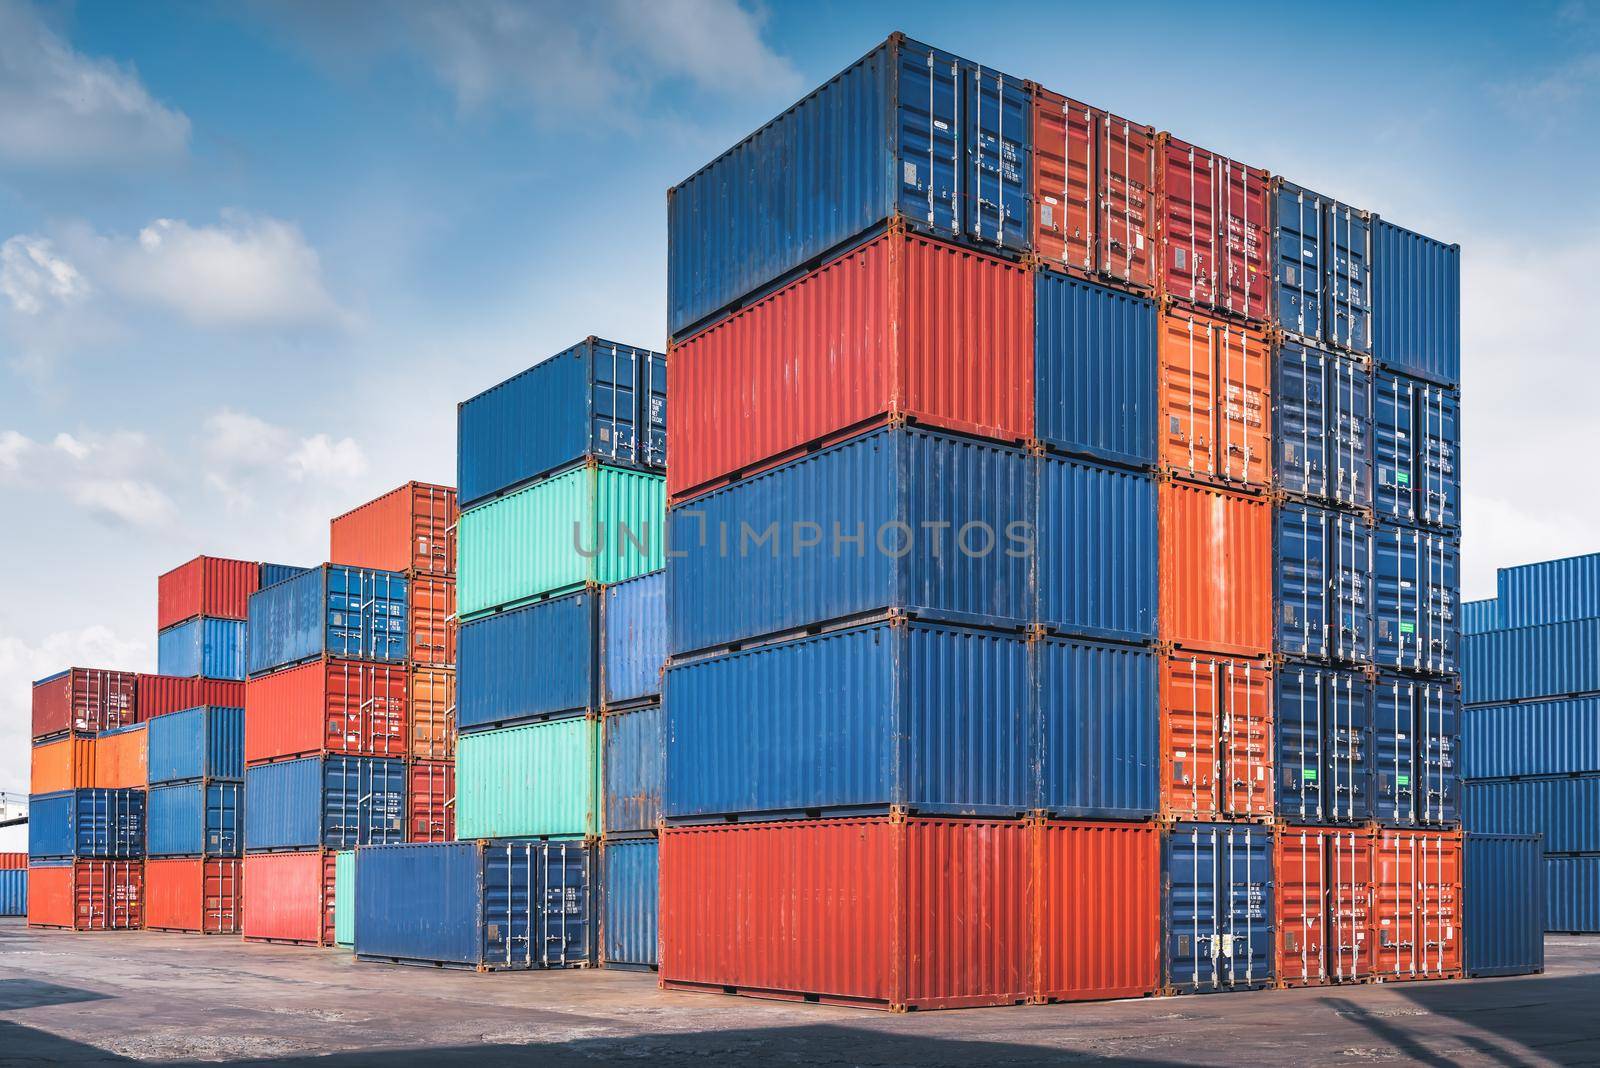 Stack of Containers Cargo Ship Import/Export in Harbor Port, Cargo Freight Shipping of Container Logistics Industry. Nautical Transport Distribution Yard, Business Commercial Dock and Transportation.  by MahaHeang245789